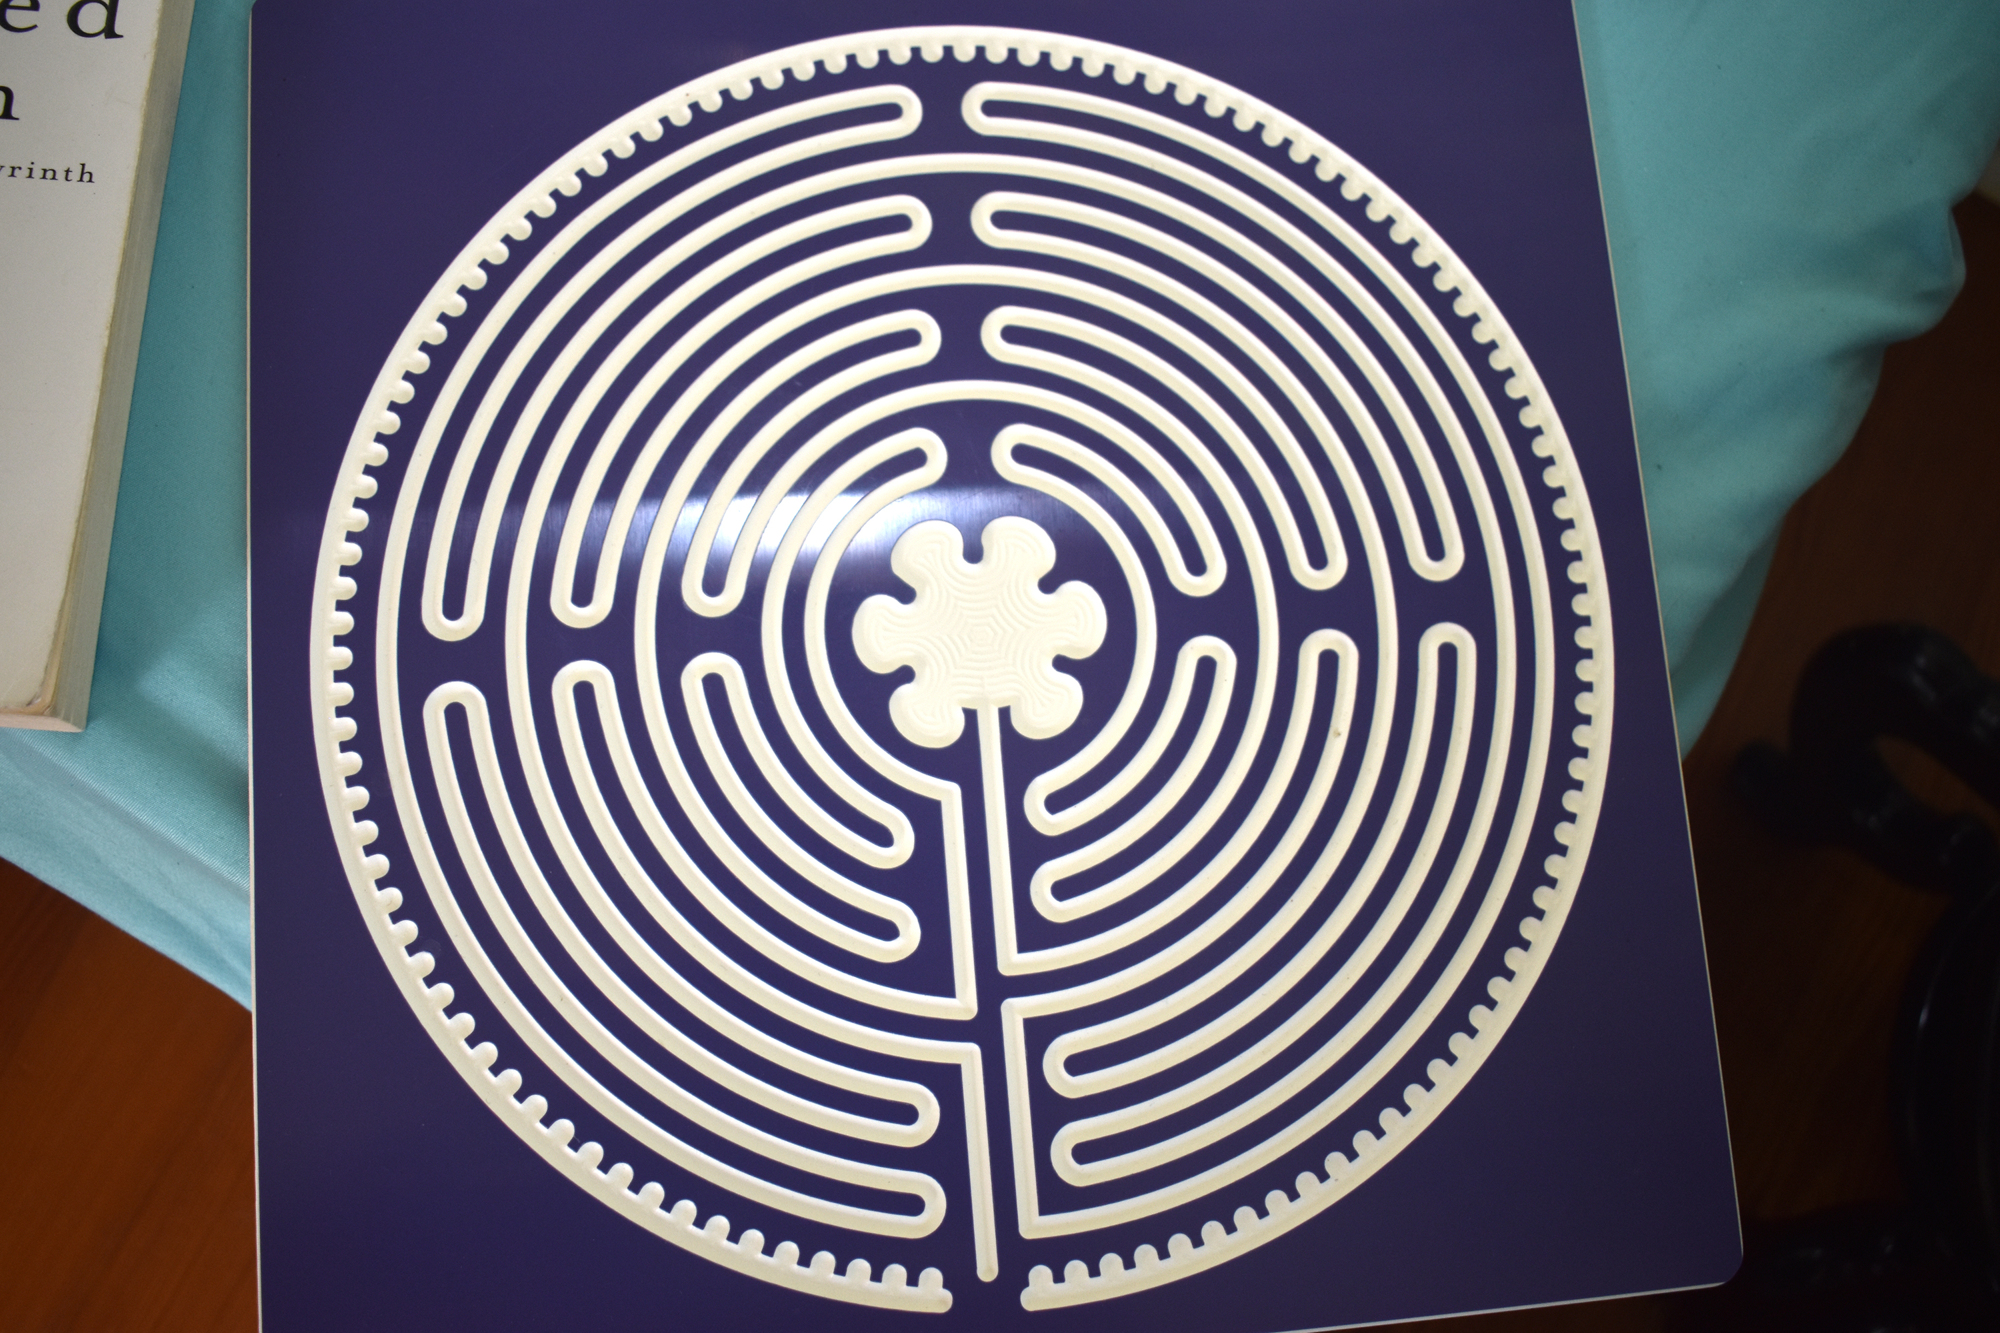 This is an example of a labyrinth pattern. Unlike mazes, labyrinths only have one way in and one way out.